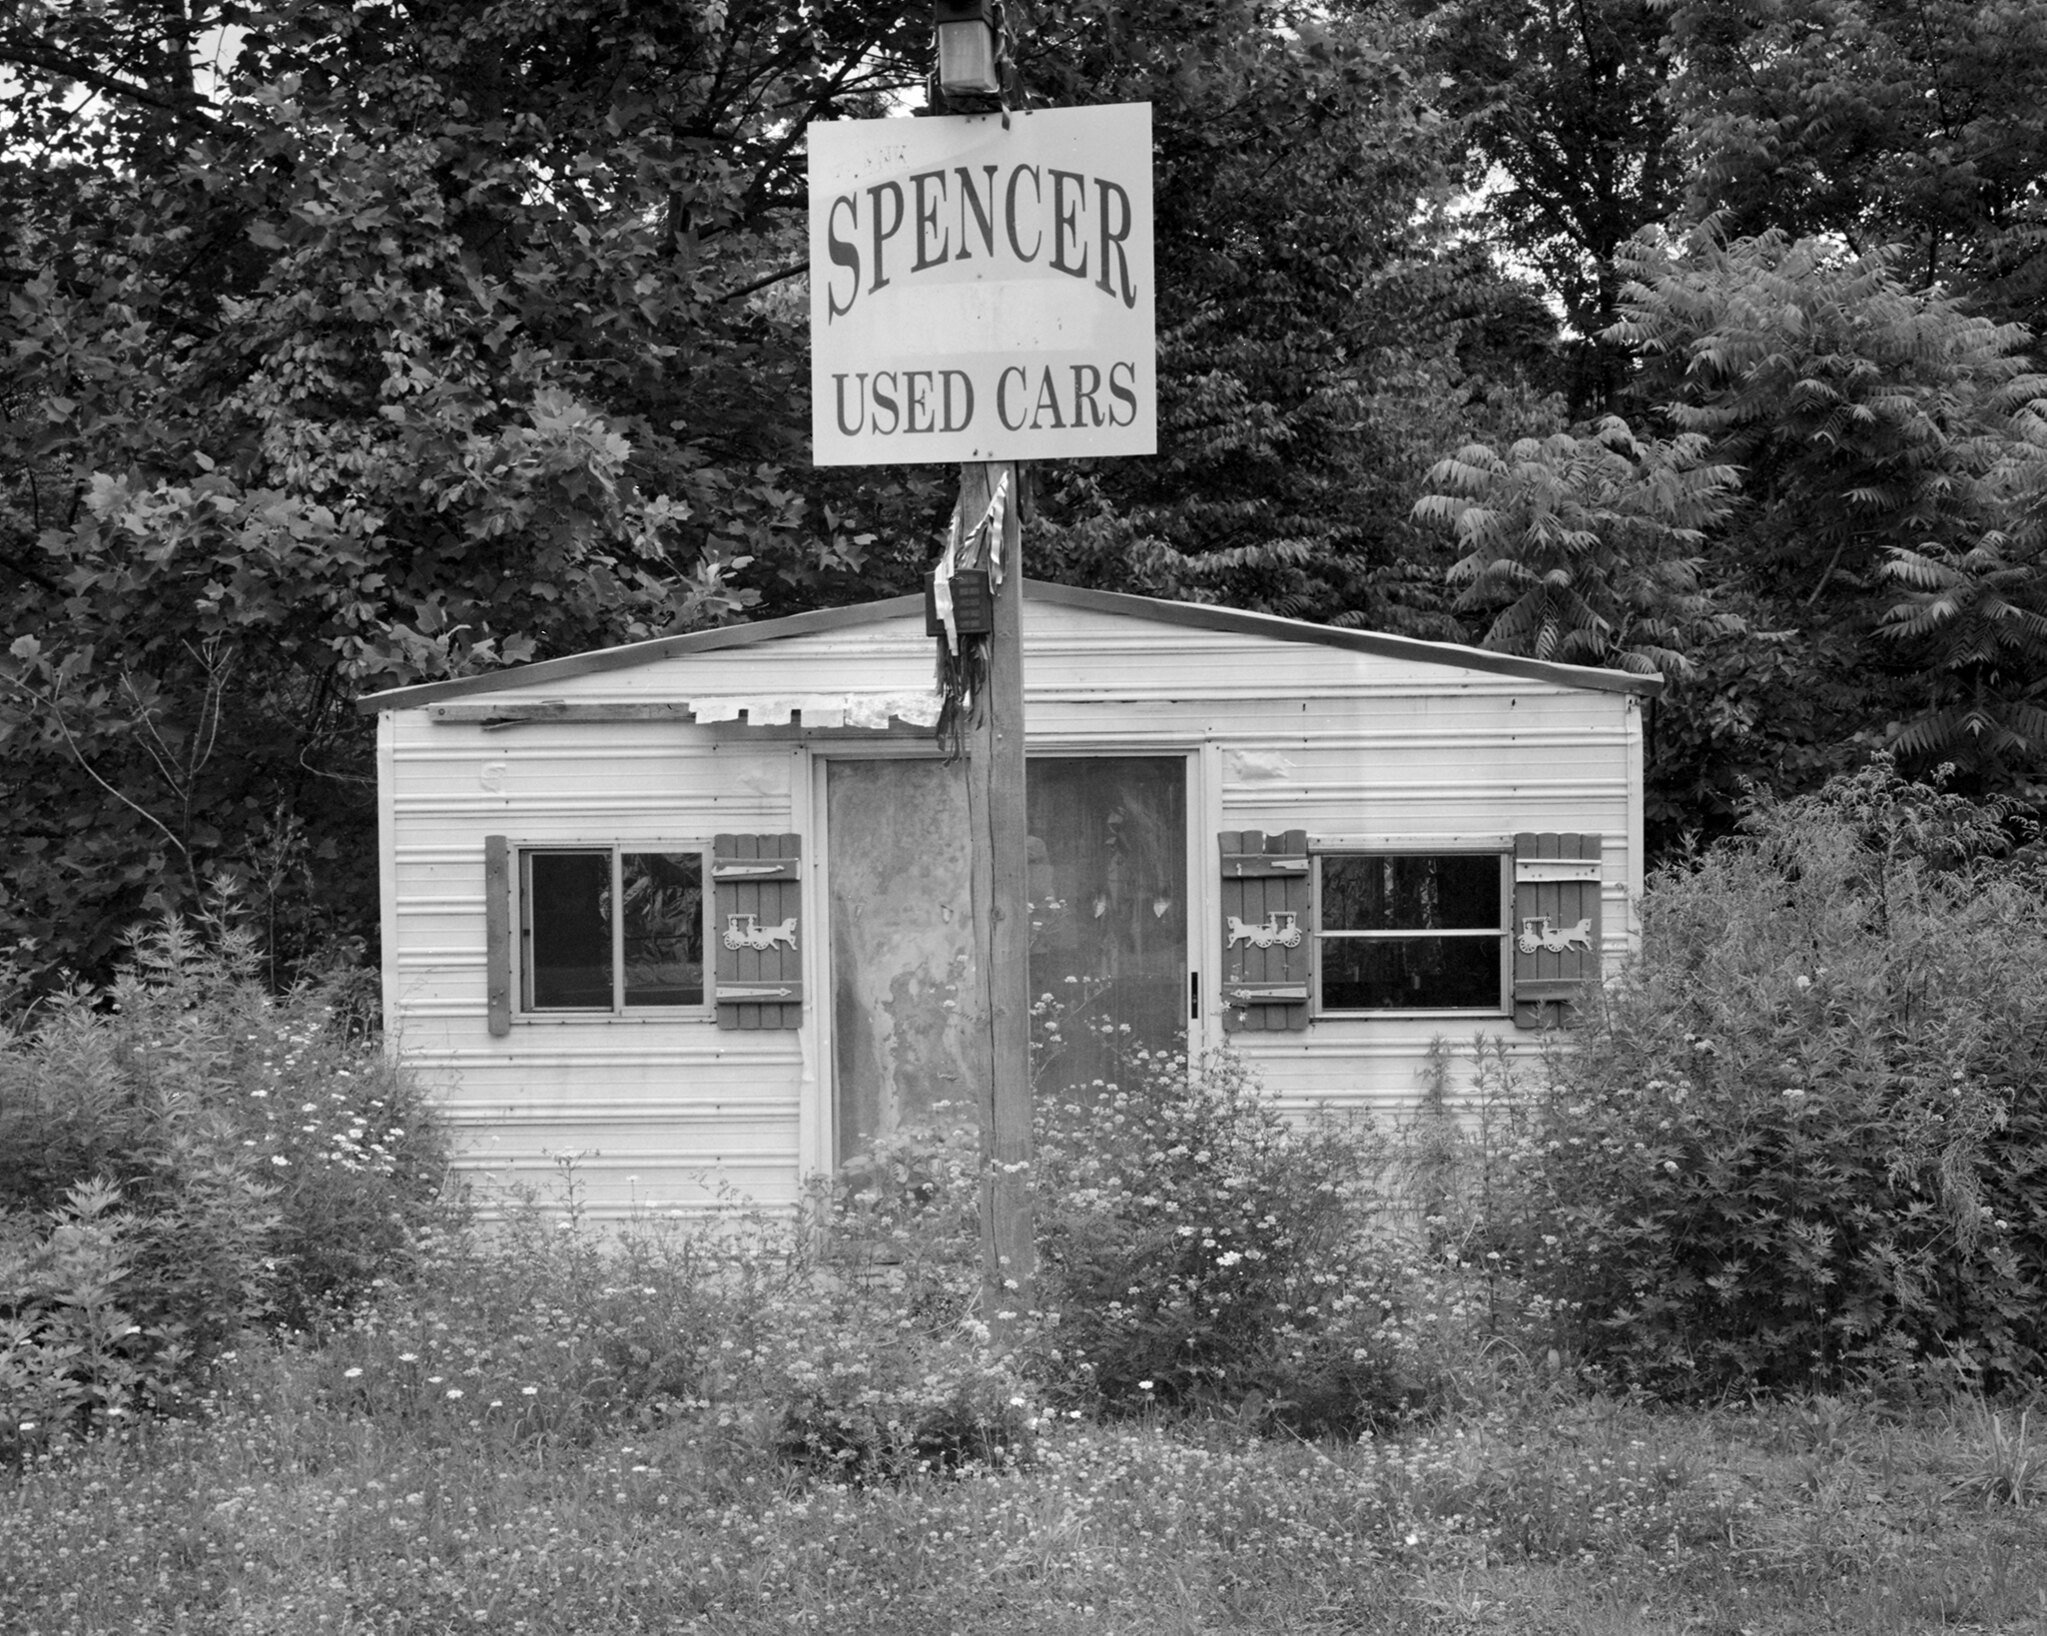  Spencer Used Cars.  Columbia County, Pennsylvania.  